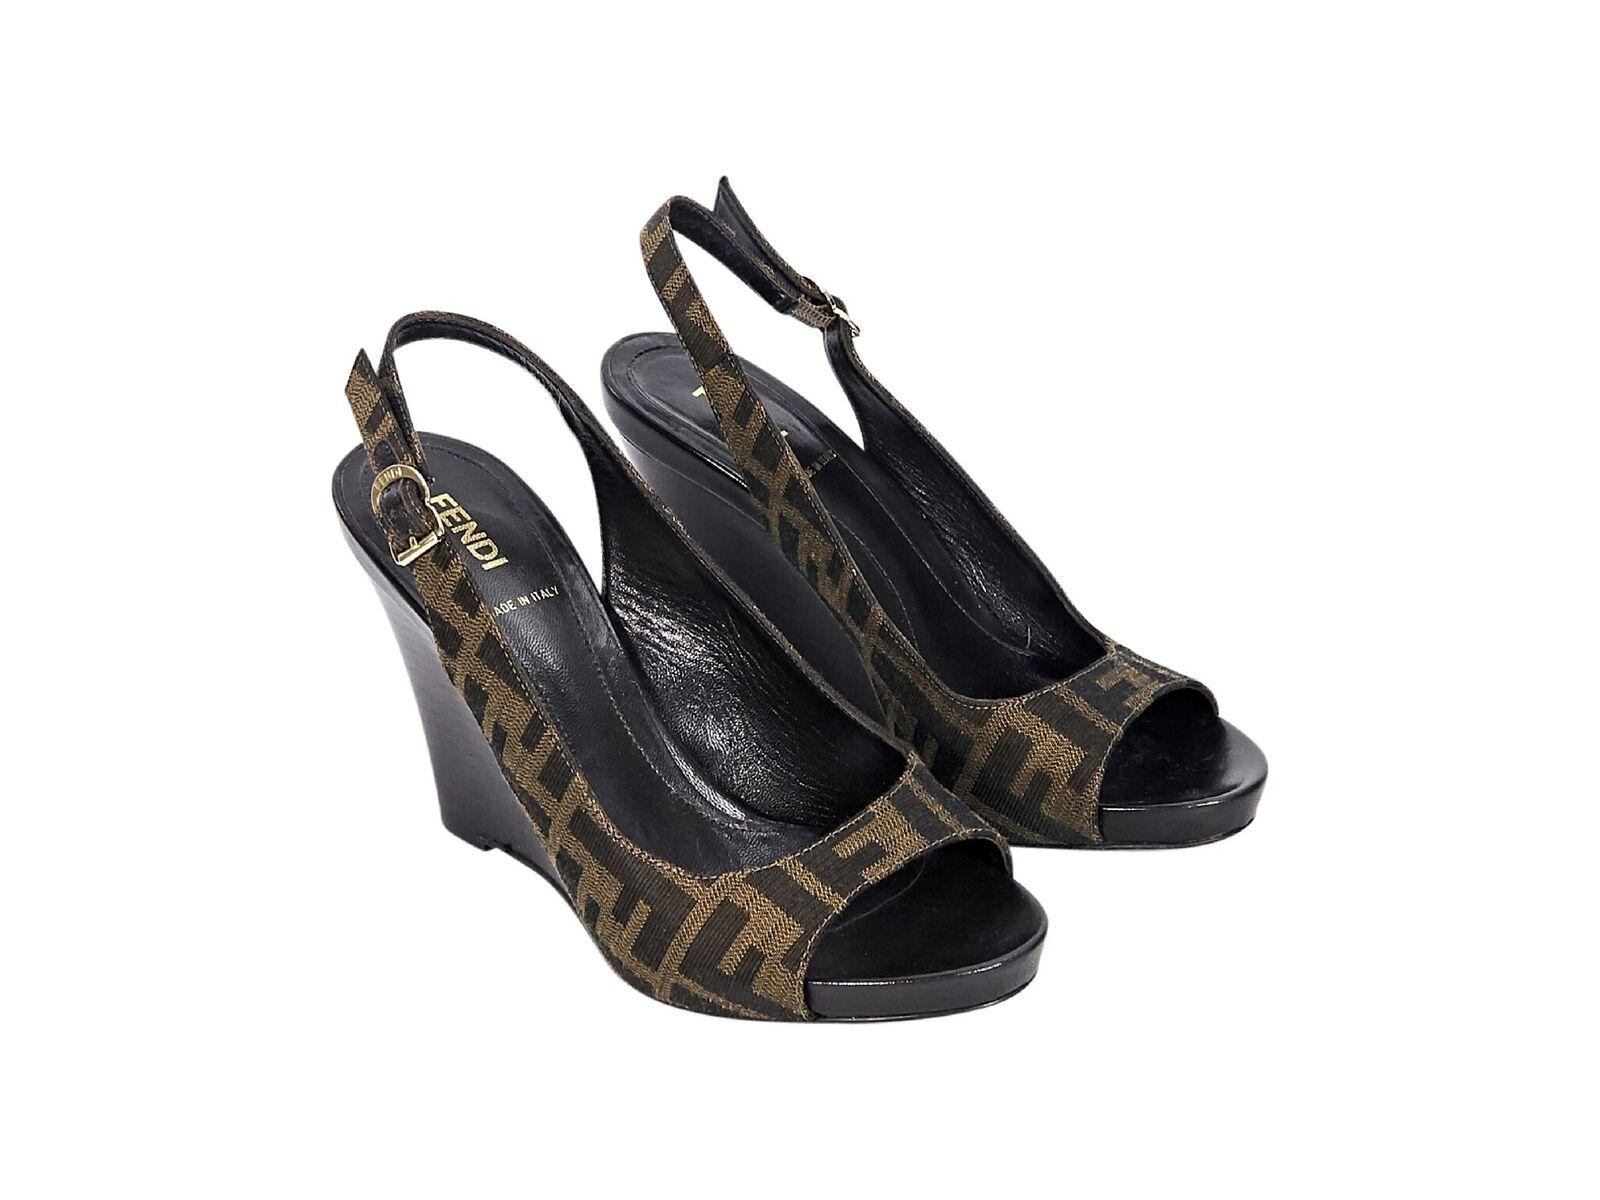 Product details:  Brown logo jacquard wedge sandals by Fendi.  Adjustable slingback strap.  Open toe.  Stacked wedge.  EU size 37.  3.5